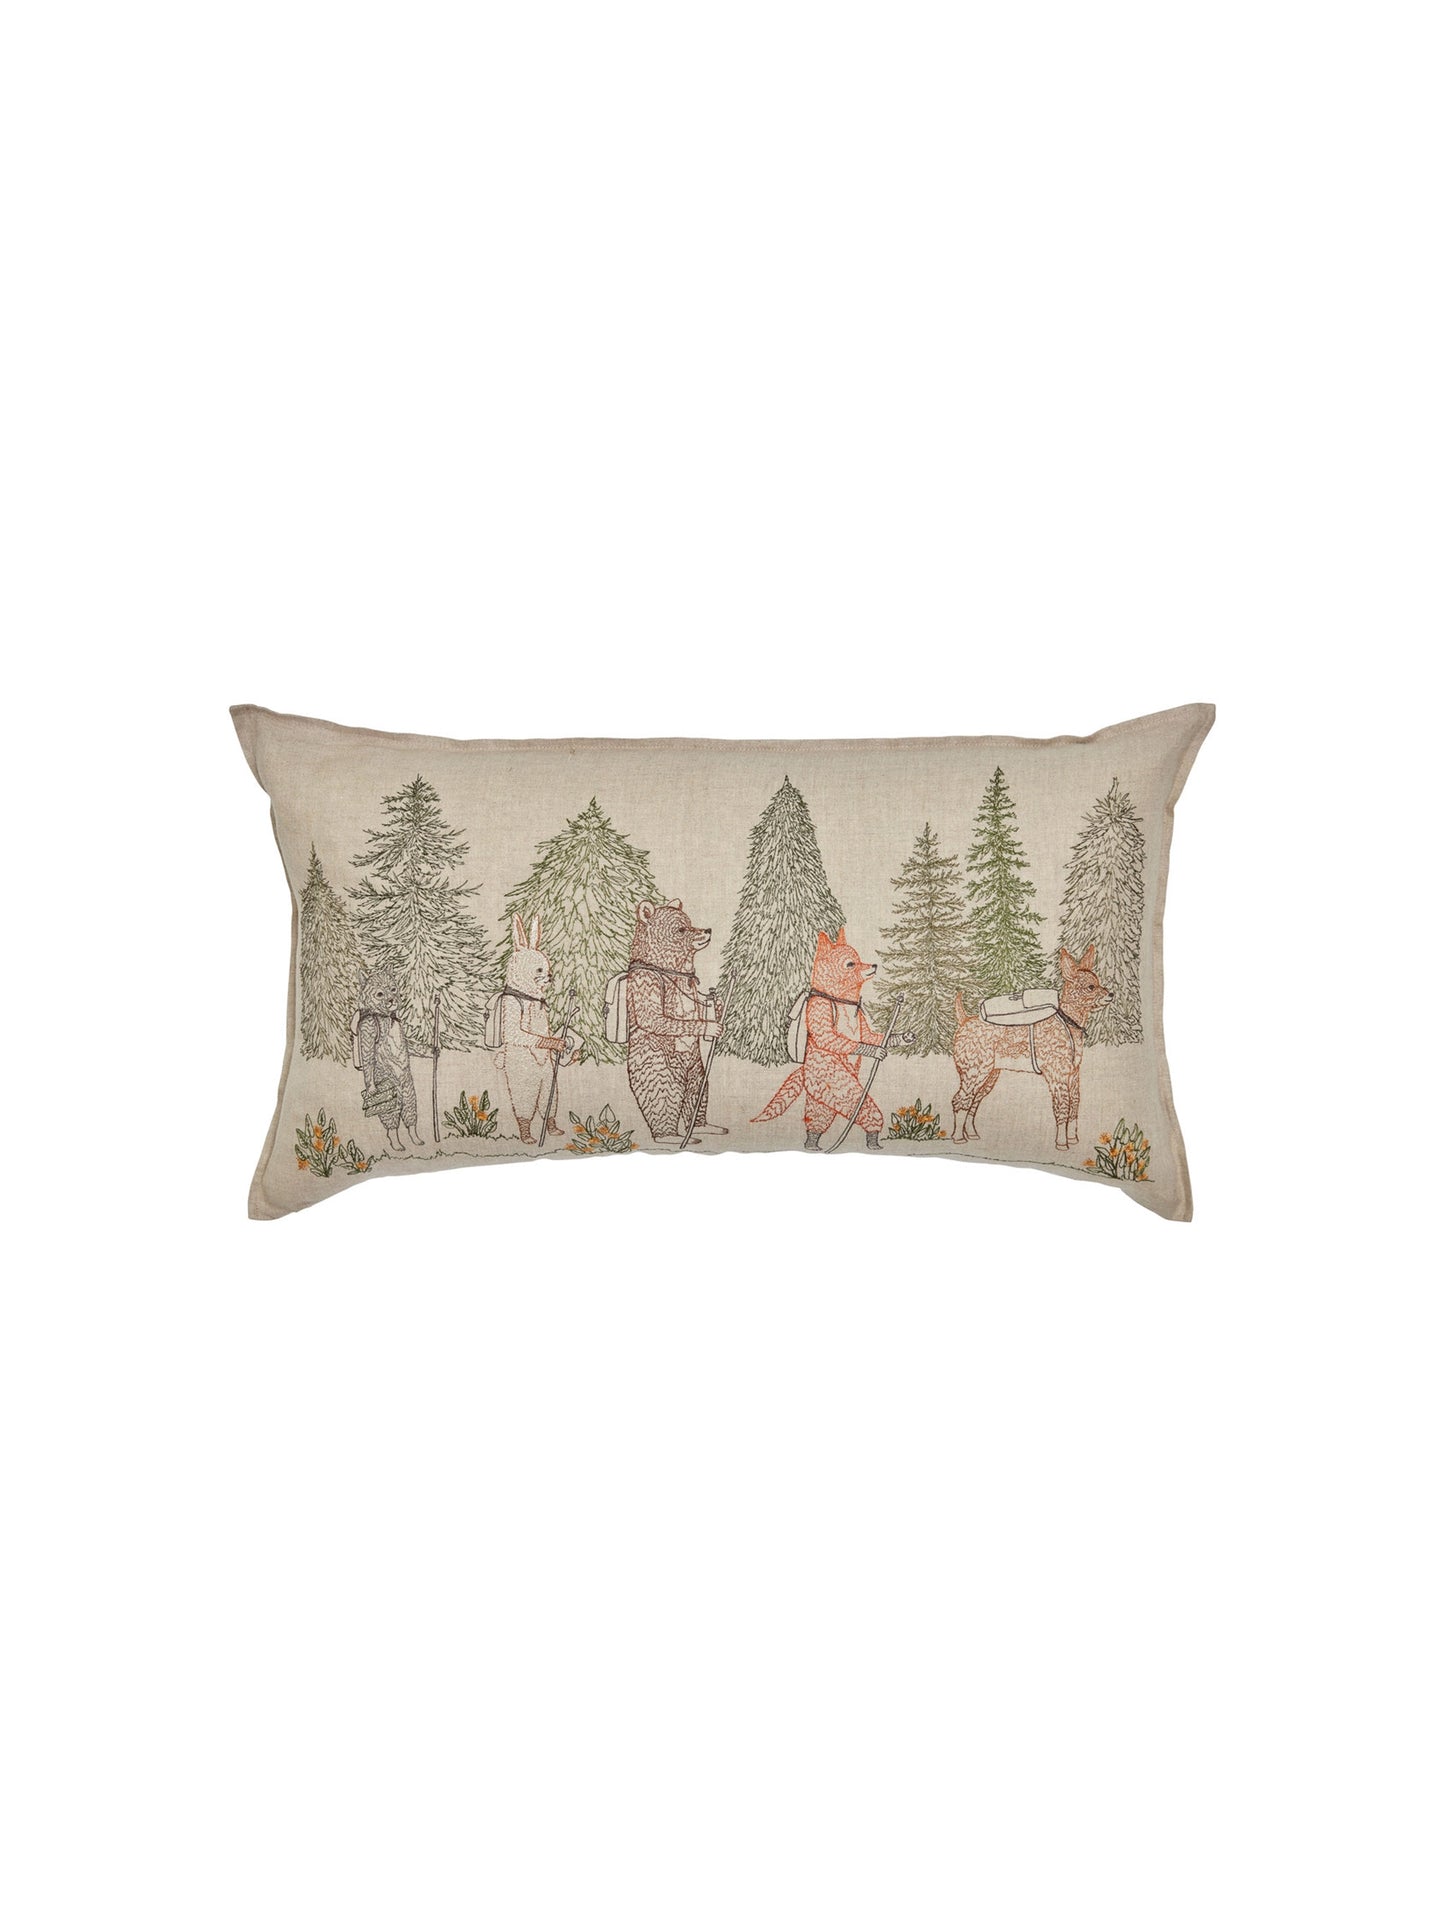 Coral & Tusk Hikers Pillow Weston Table